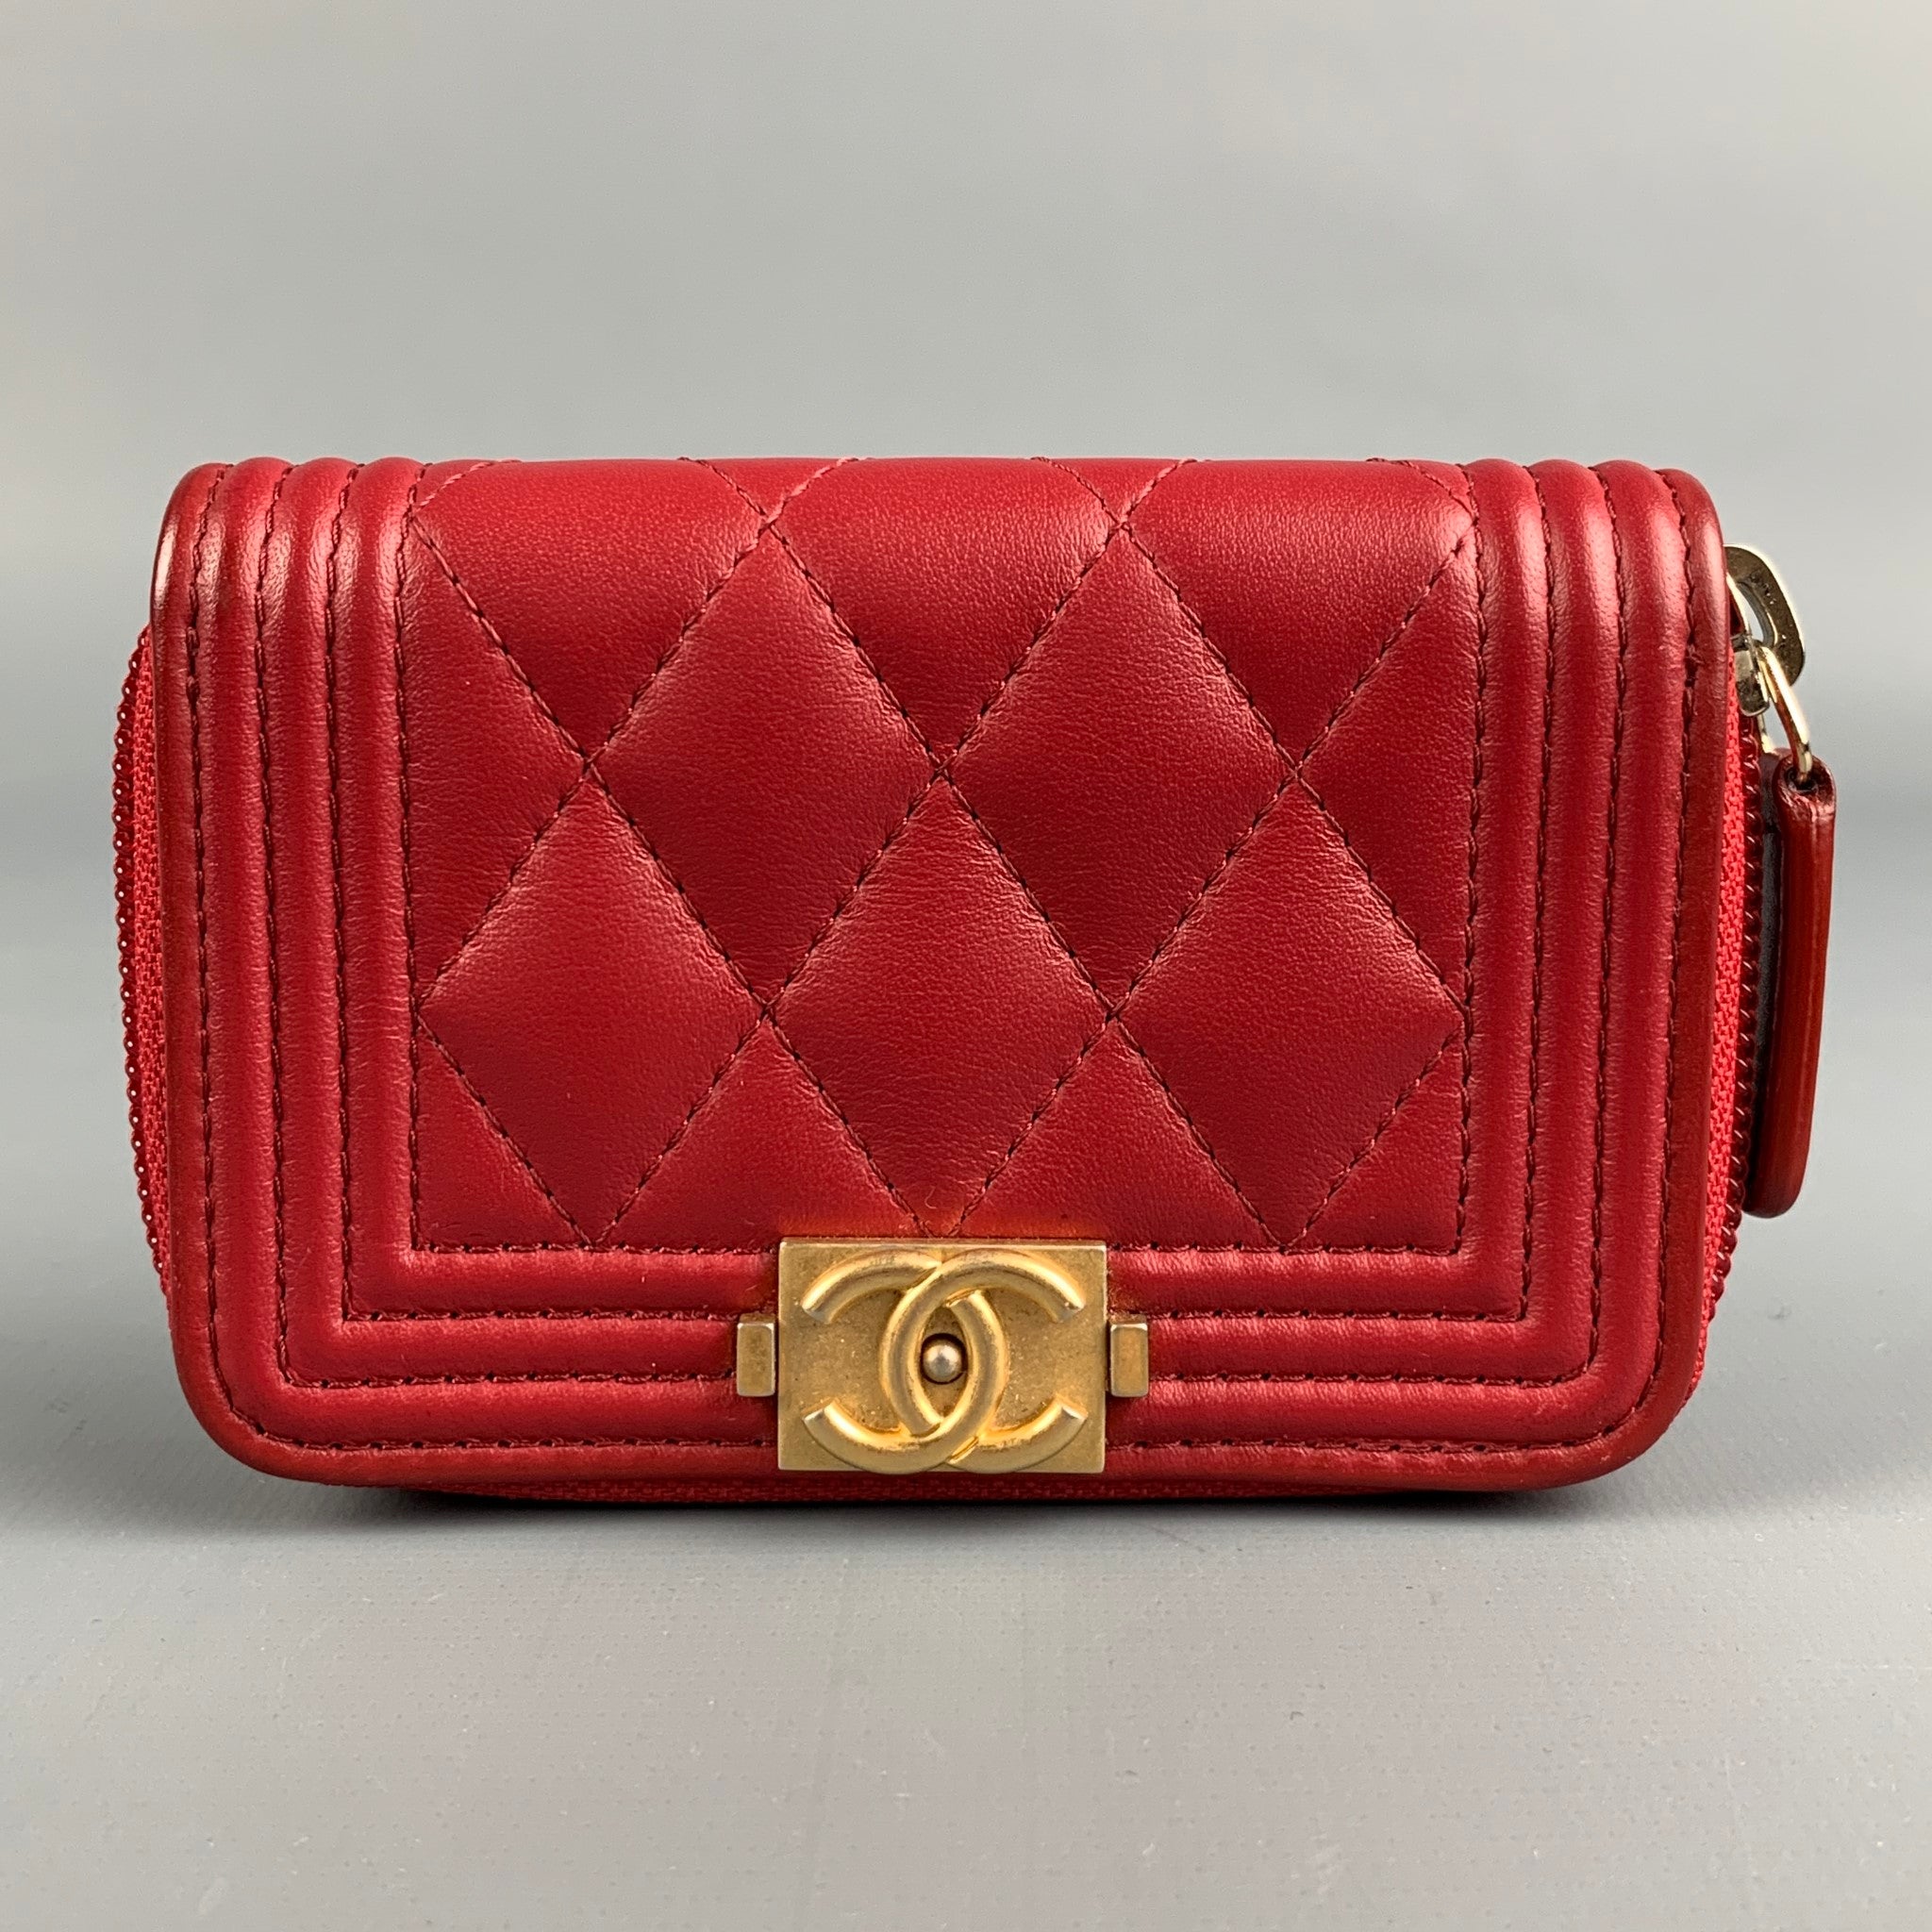 CHANEL Red Caviar Quilted Leather Zip Around Coin Purse Wallet